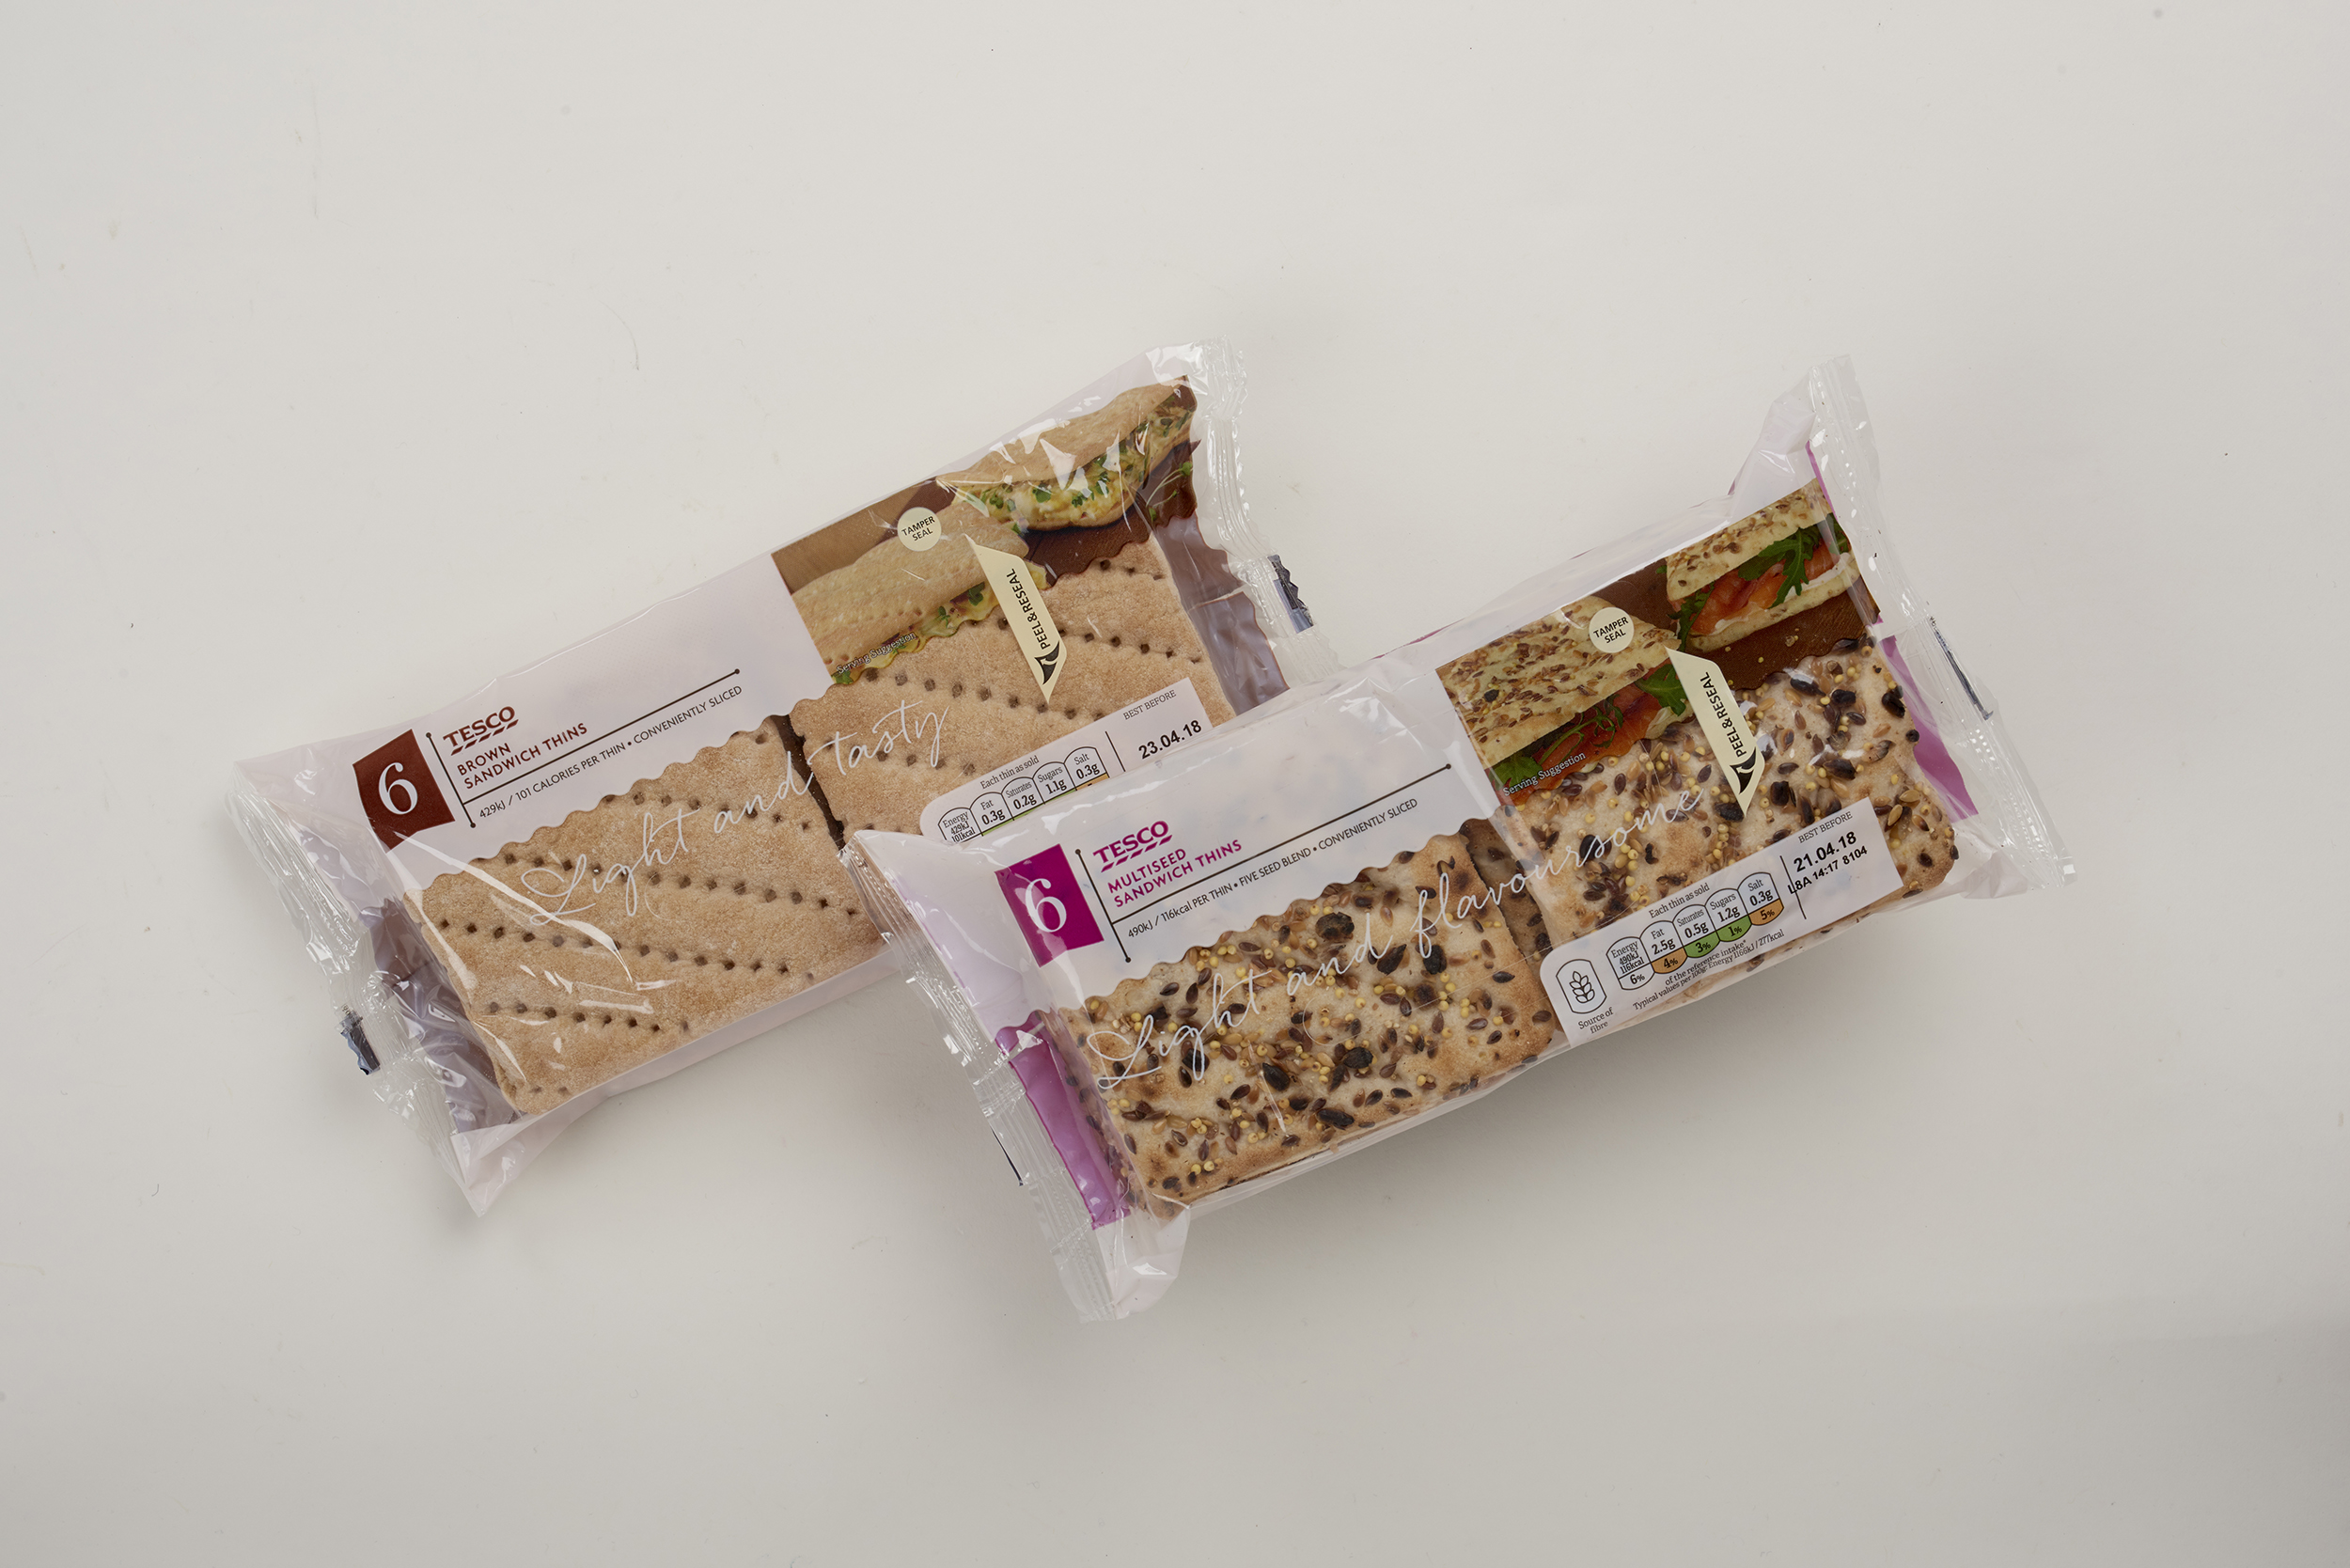 Re-sealable food packs – what consumers want from them